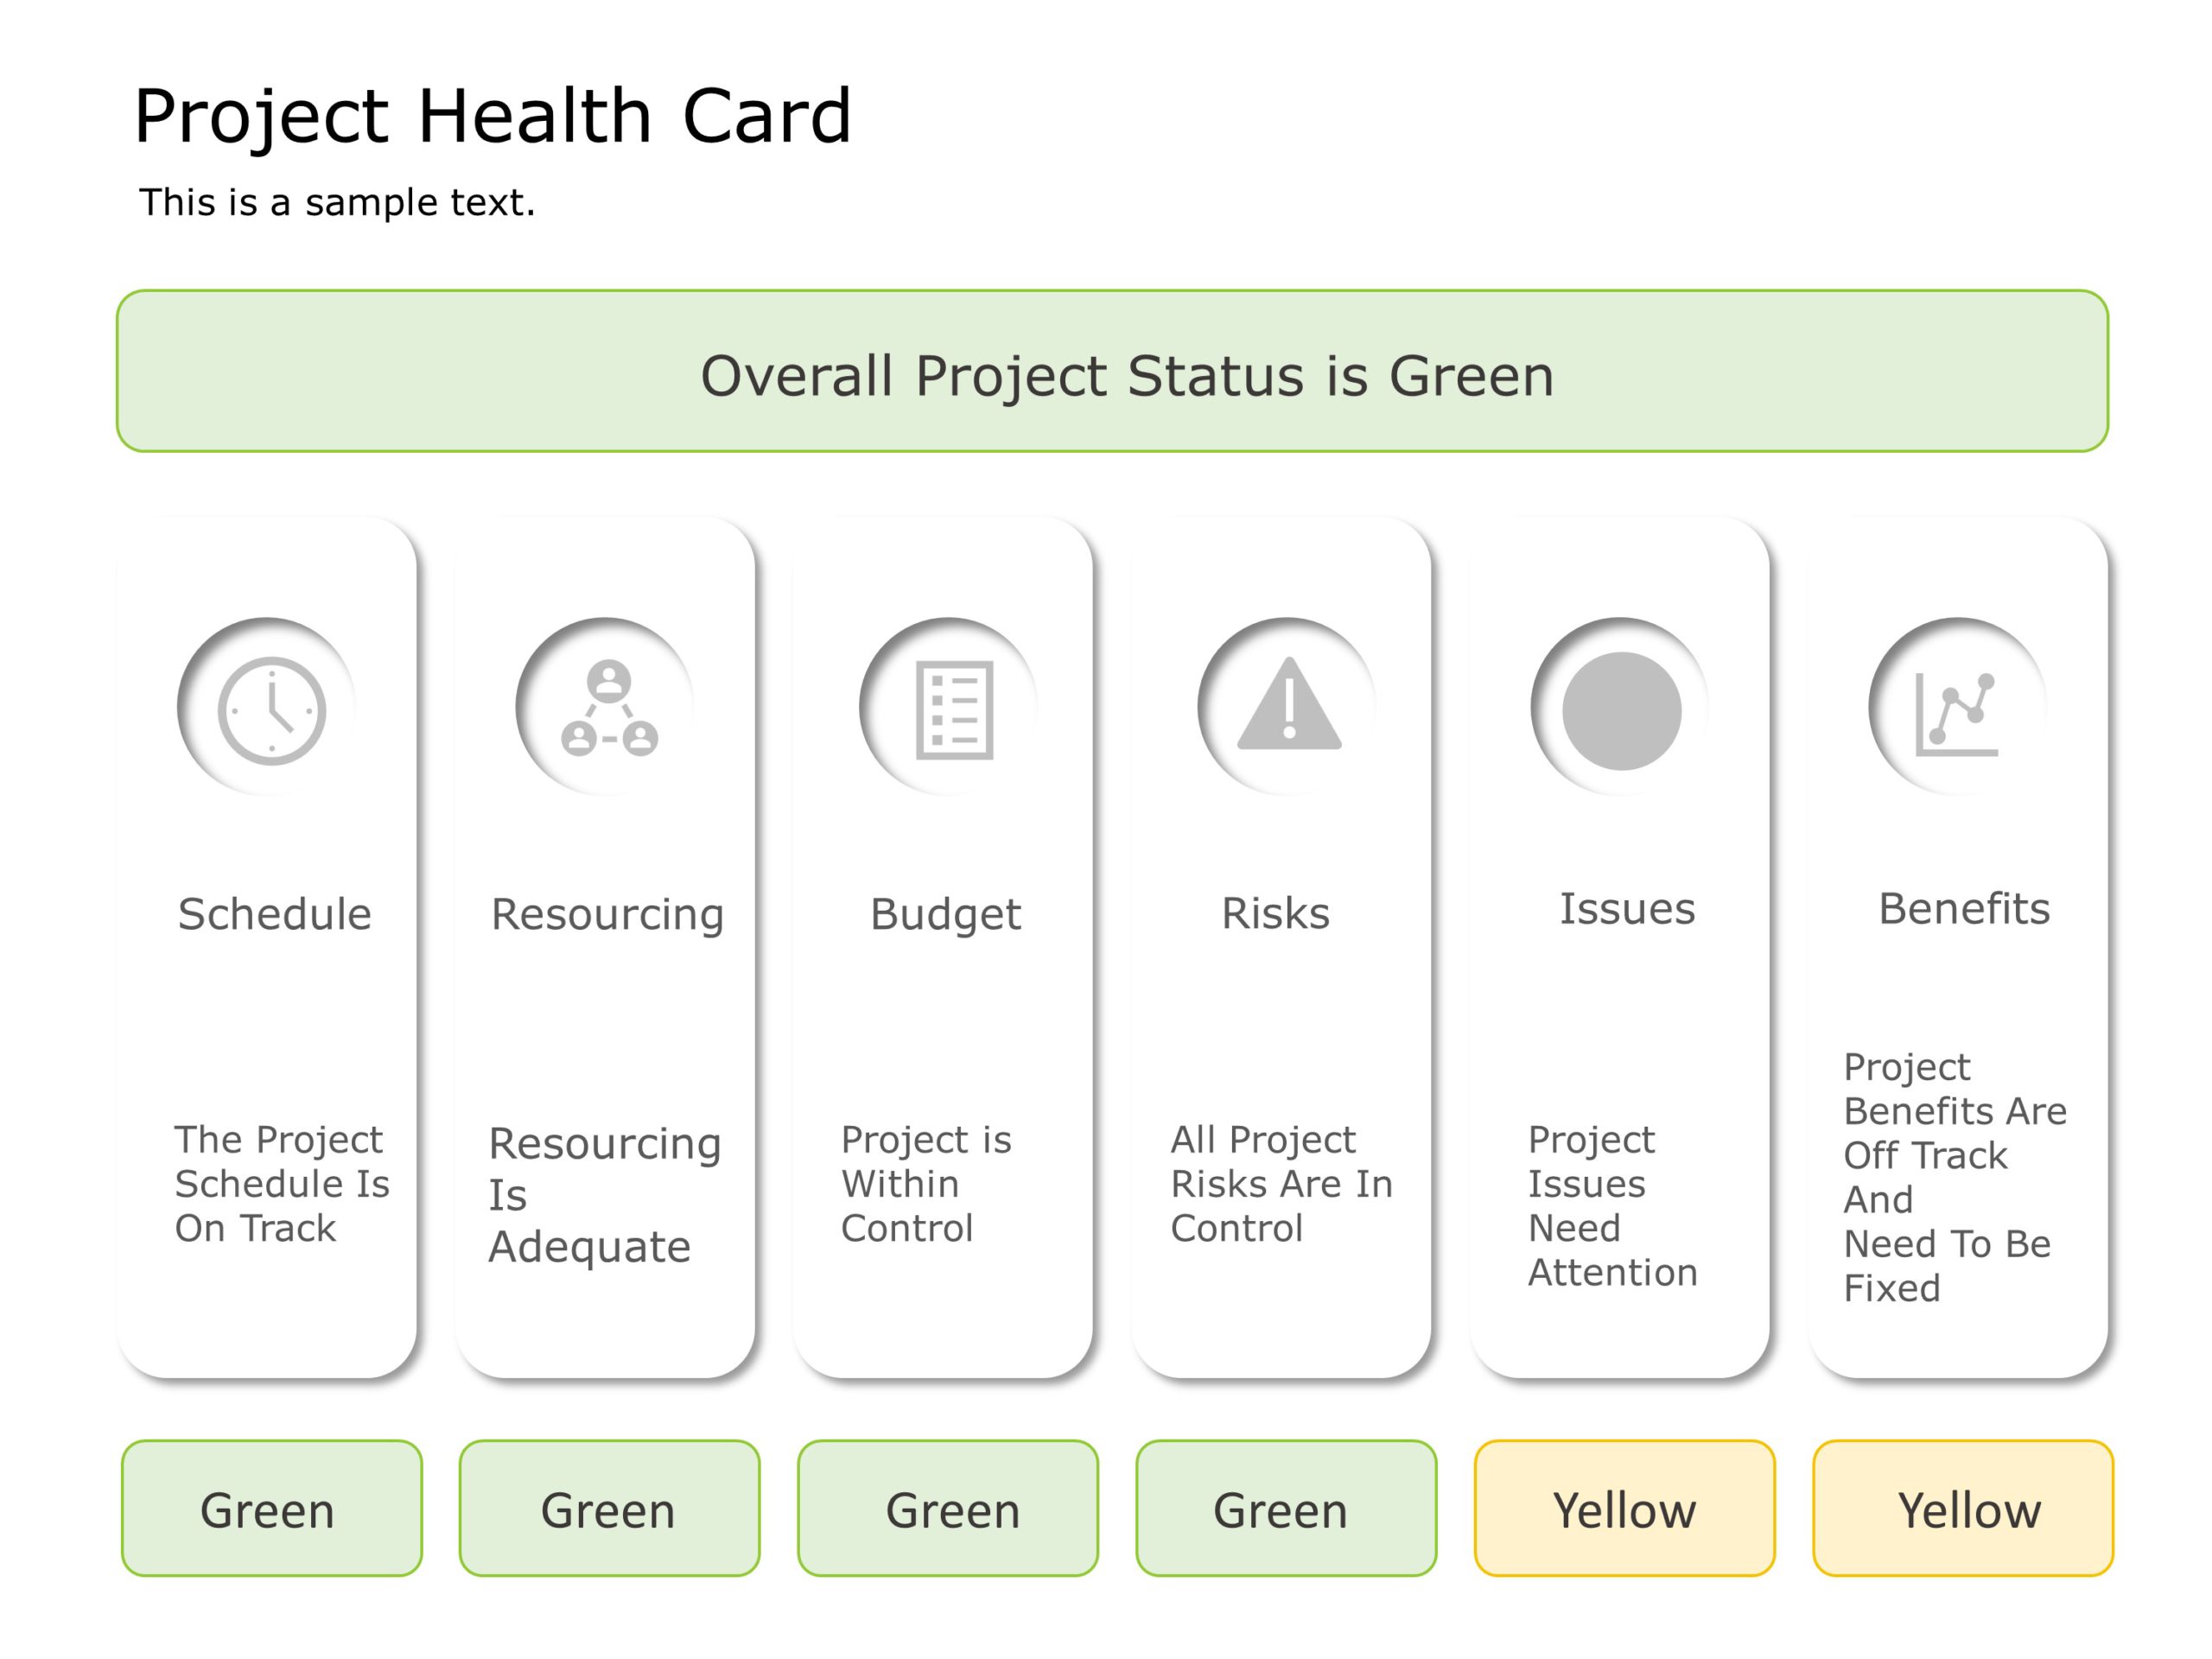 Project Report Card PowerPoint Template